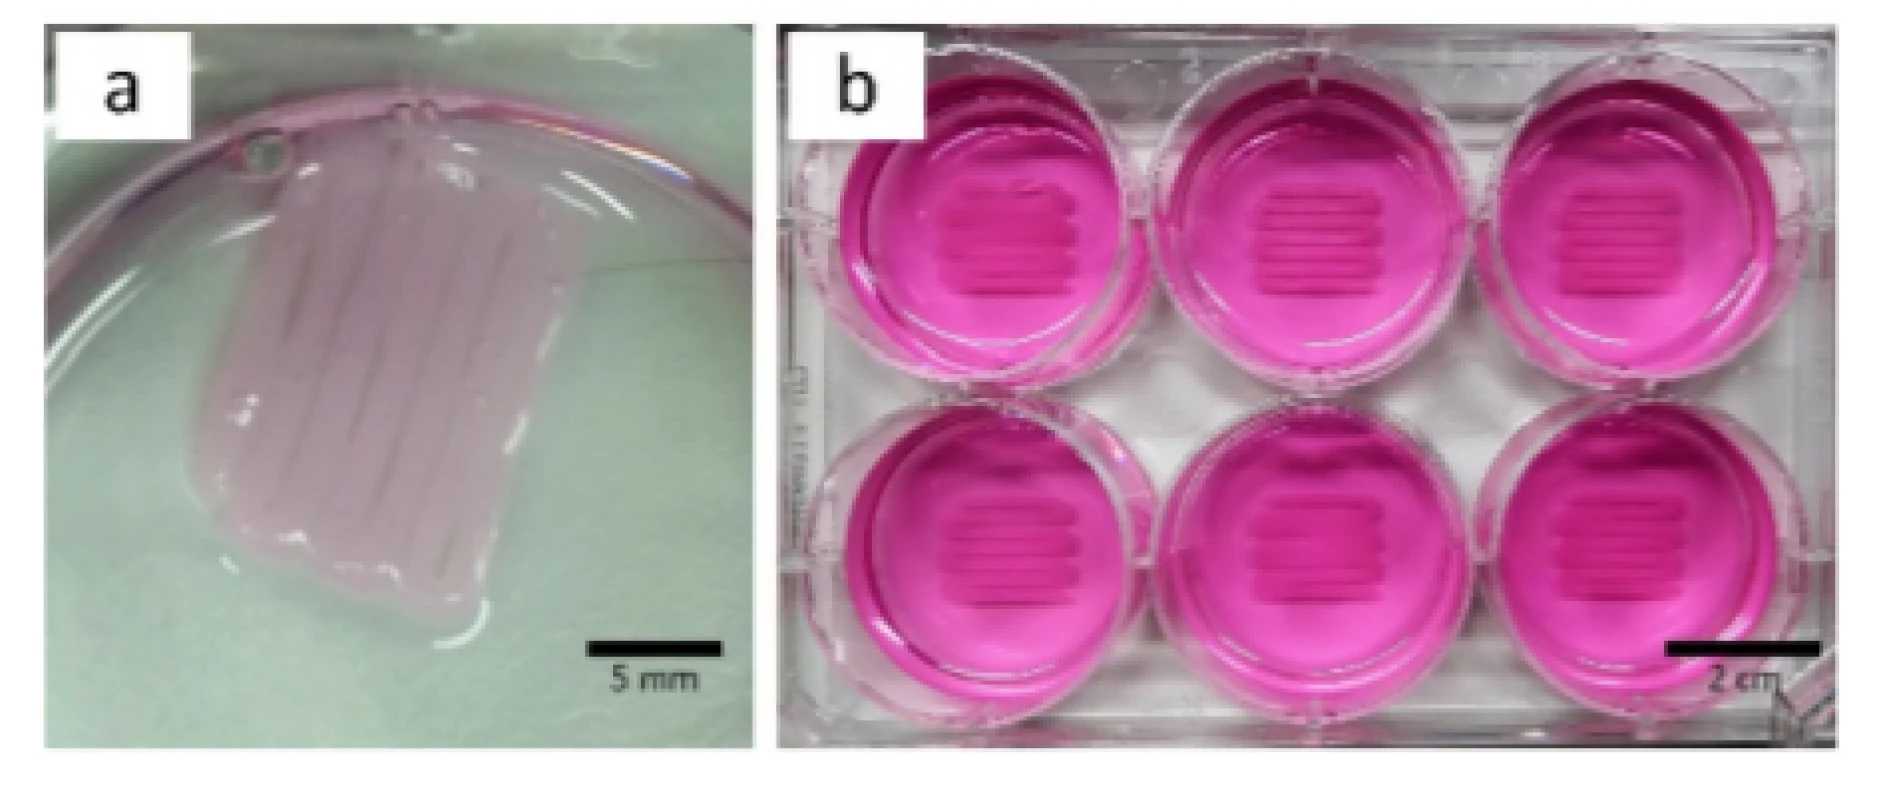 Printed meandering structure detached from
surface without PEI and laminin coating (a, culture
medium was removed) and same structure on coated
surface to guarantee tissue adhesion (b, culture medium
present).